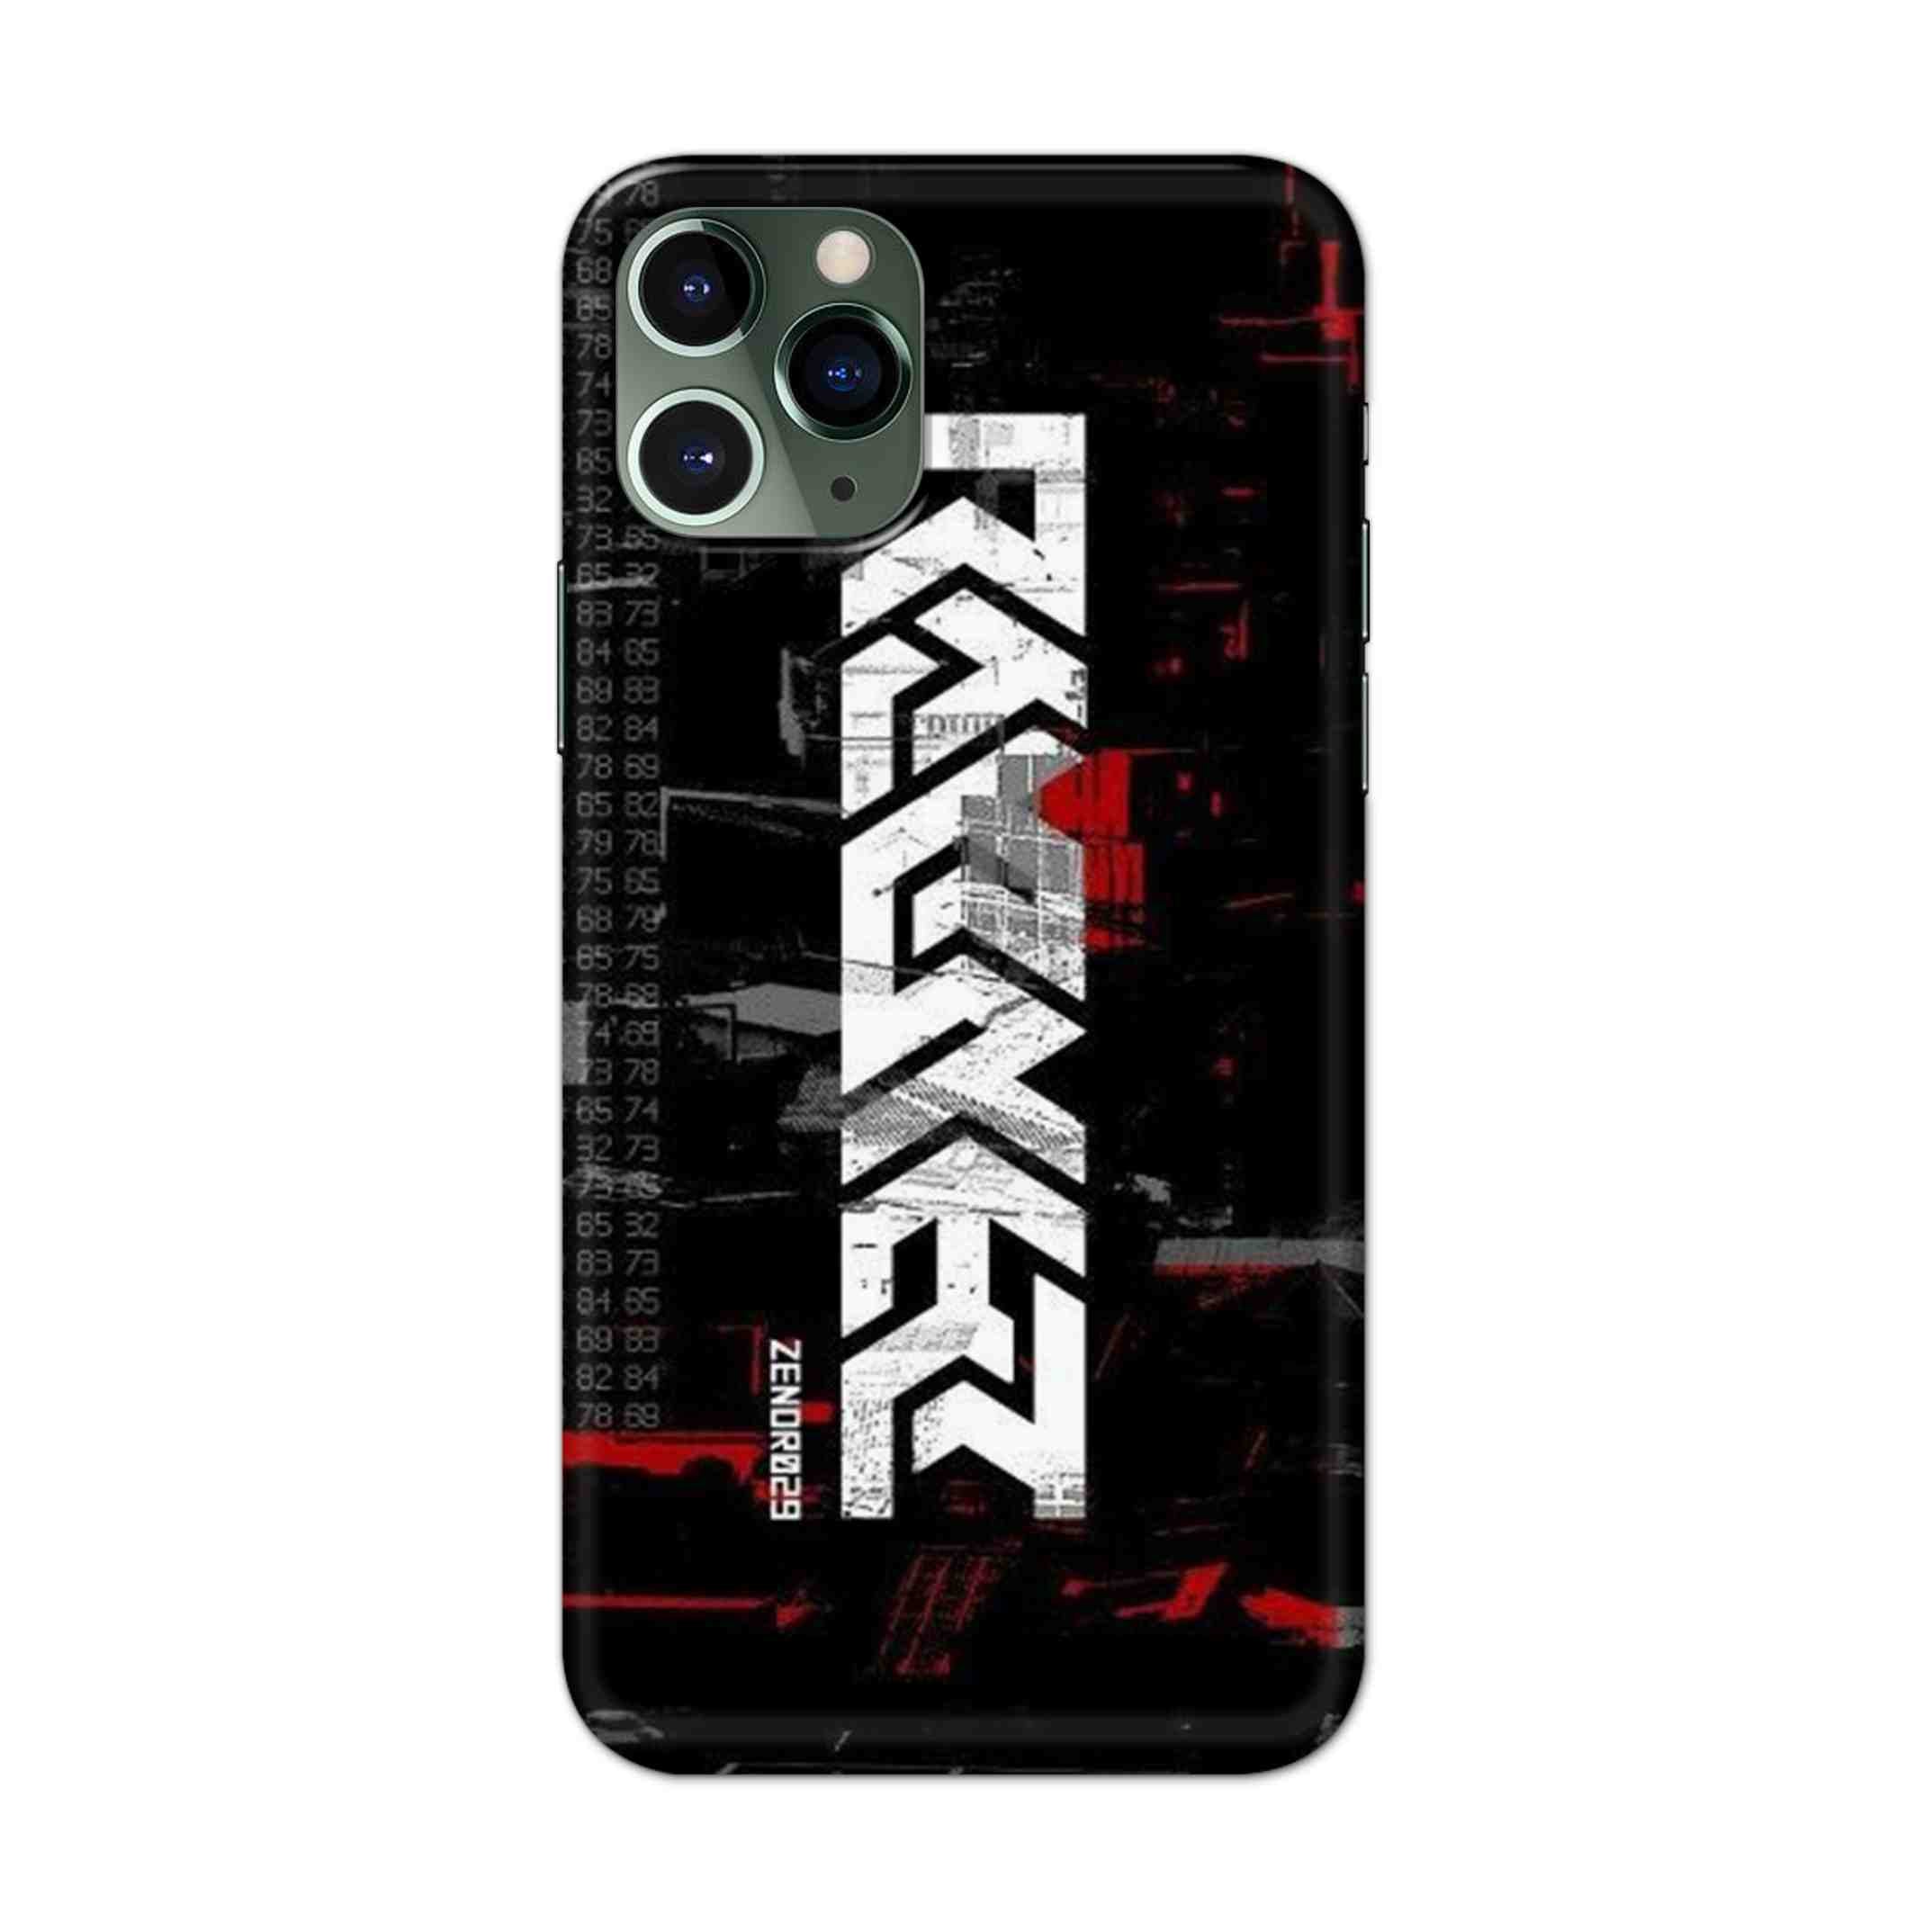 Buy Raxer Hard Back Mobile Phone Case/Cover For iPhone 11 Pro Online